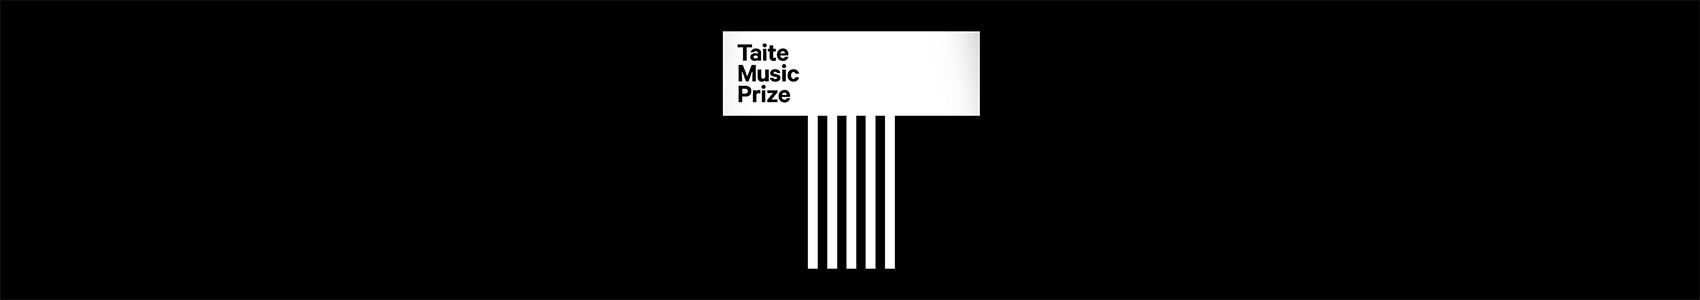 Anthonie Tonnon wins 2022 Taite Music Prize for his album Leave Love Out Of This